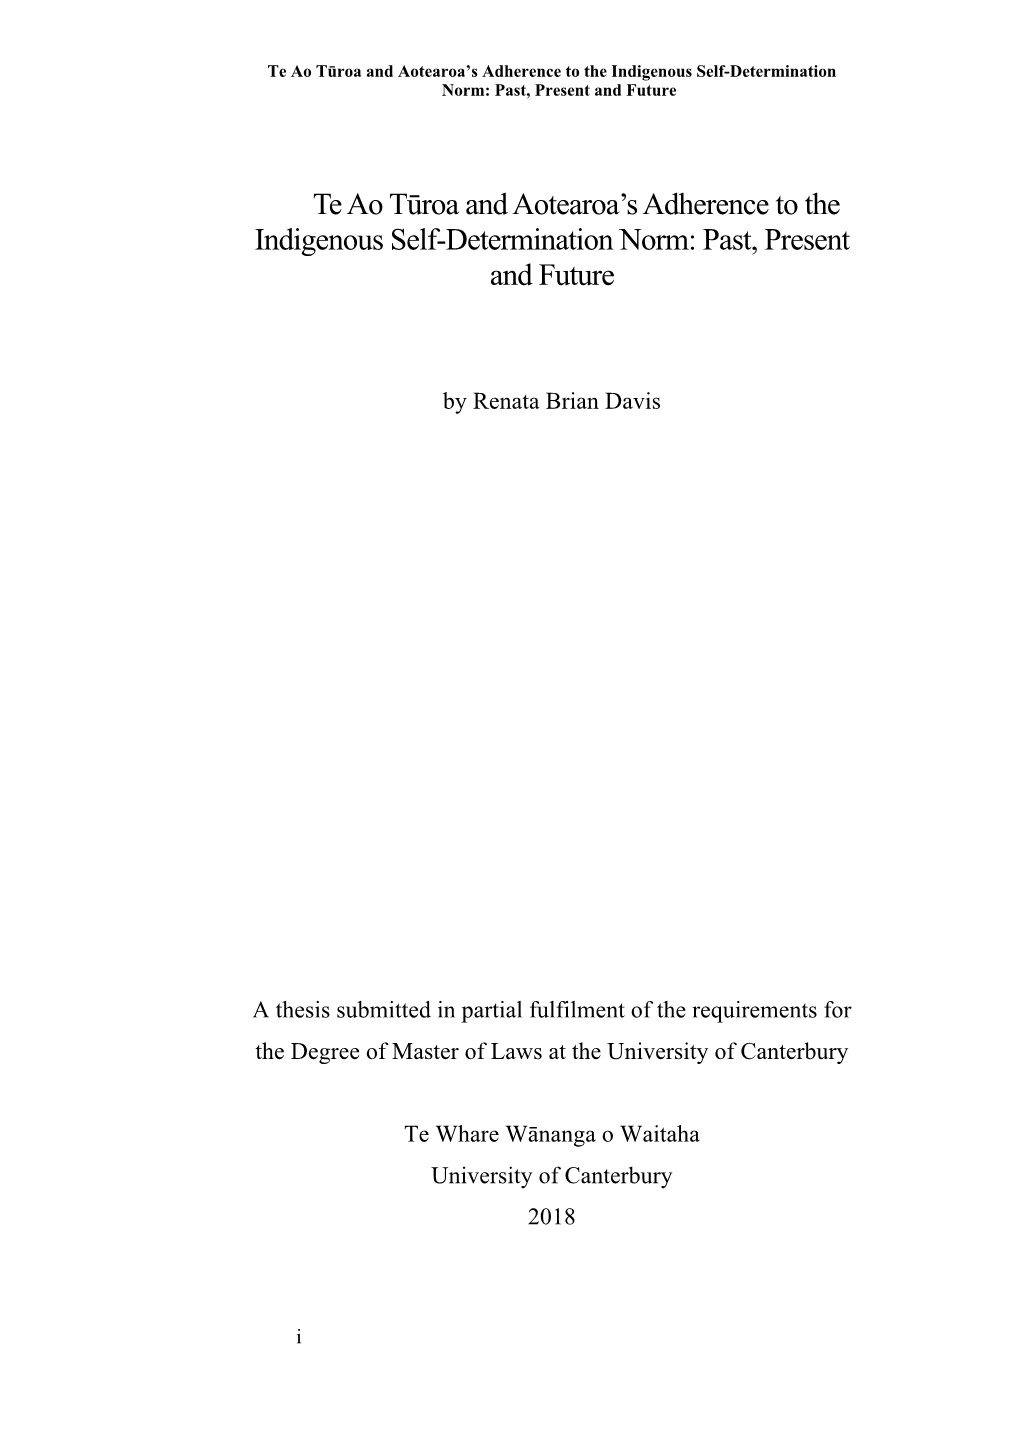 Indigenous Self-Determination Norm: Past, Present and Future